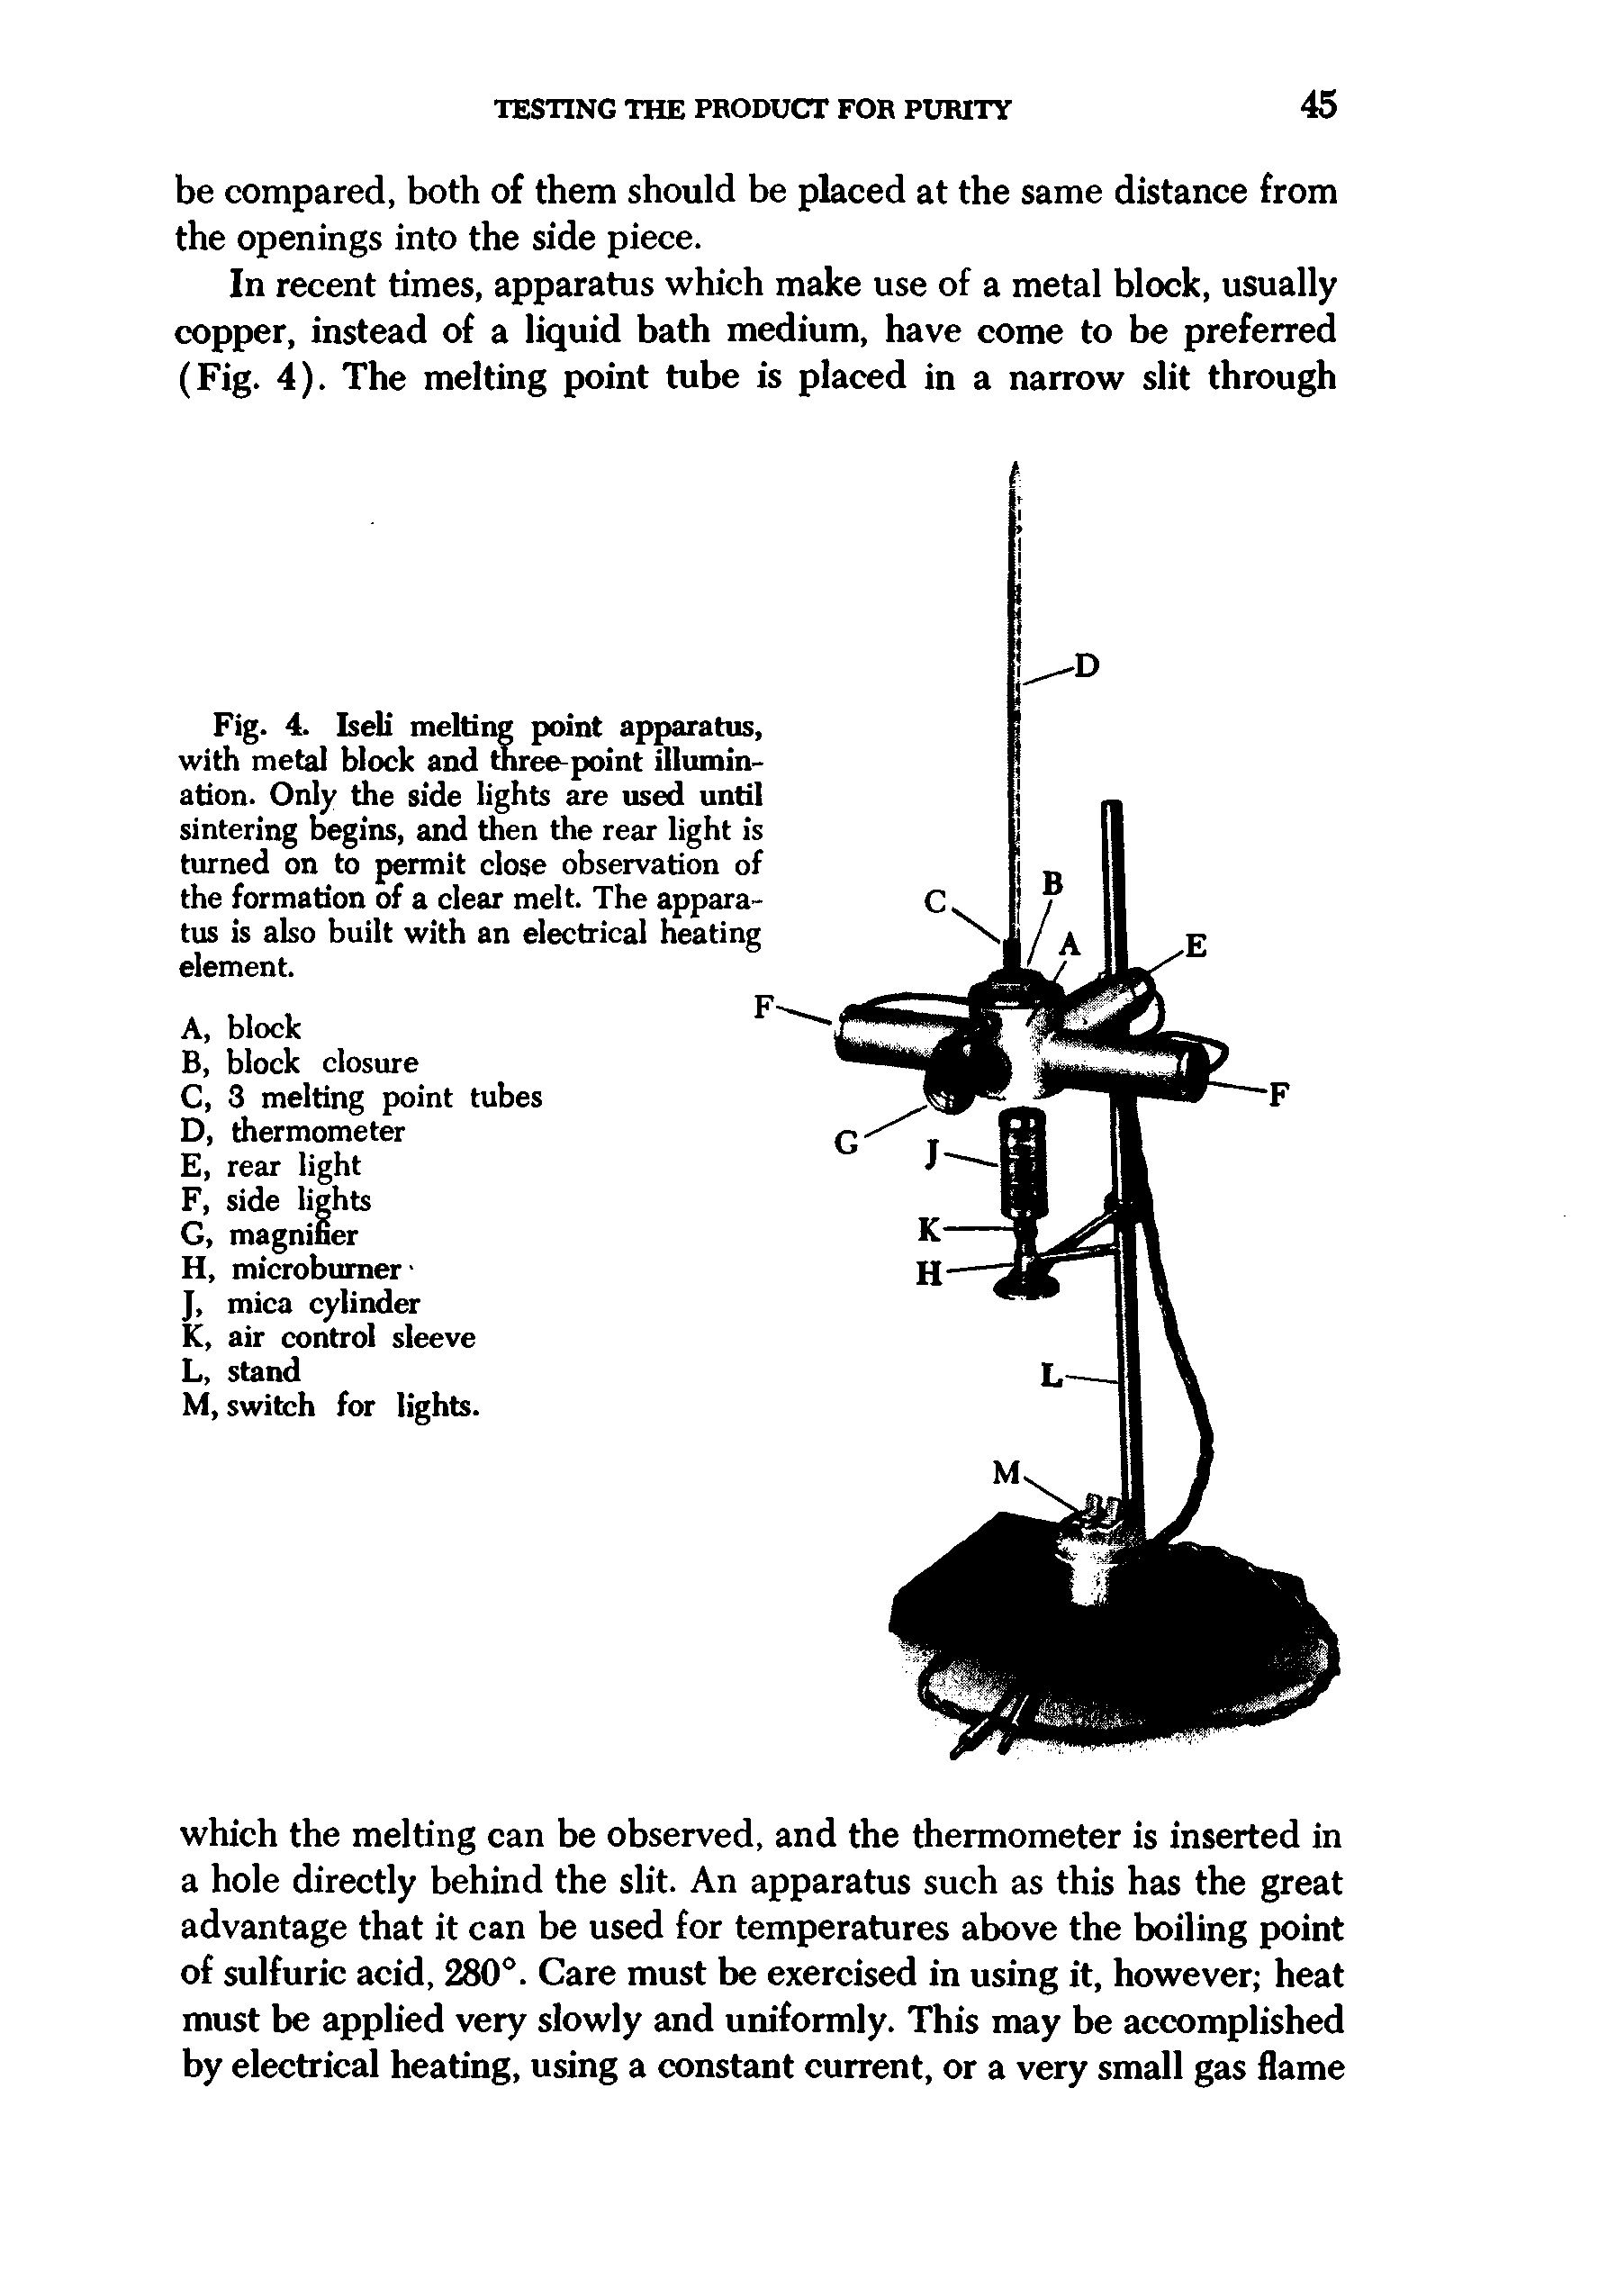 Fig. 4. Iseli melting point apparatus, with metal block and uree-point illumination. Only the side lights are used until sintering begins, and then the rear light is turned on to permit close observation of the formation of a clear melt. The apparatus is also built with an electrical heating element.